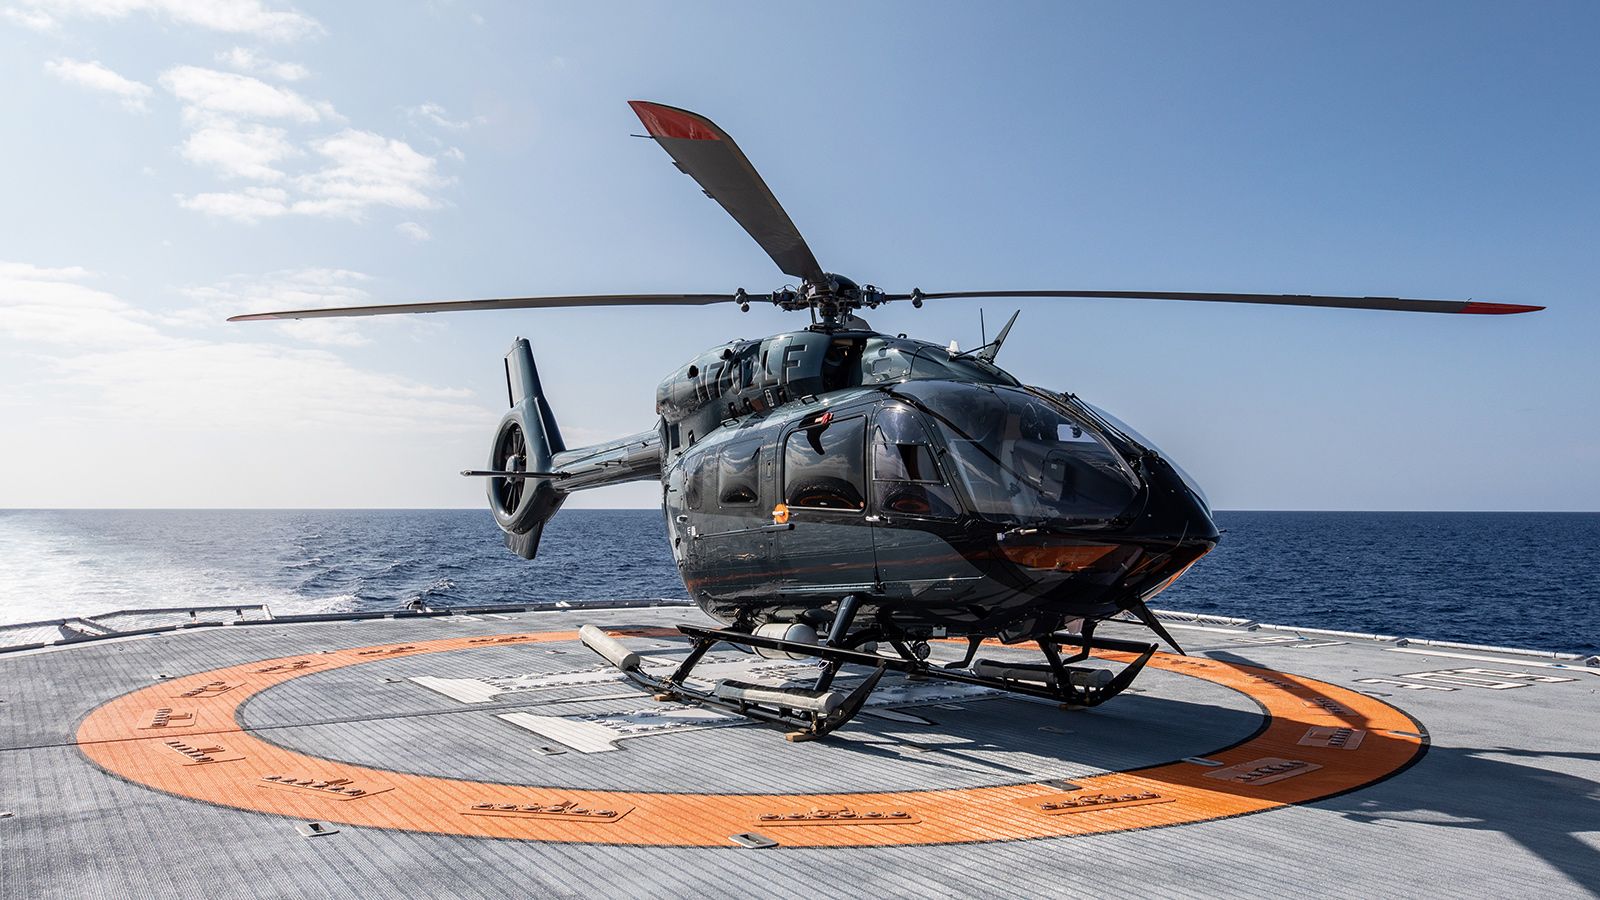 The Best Helicopters For Superyachts